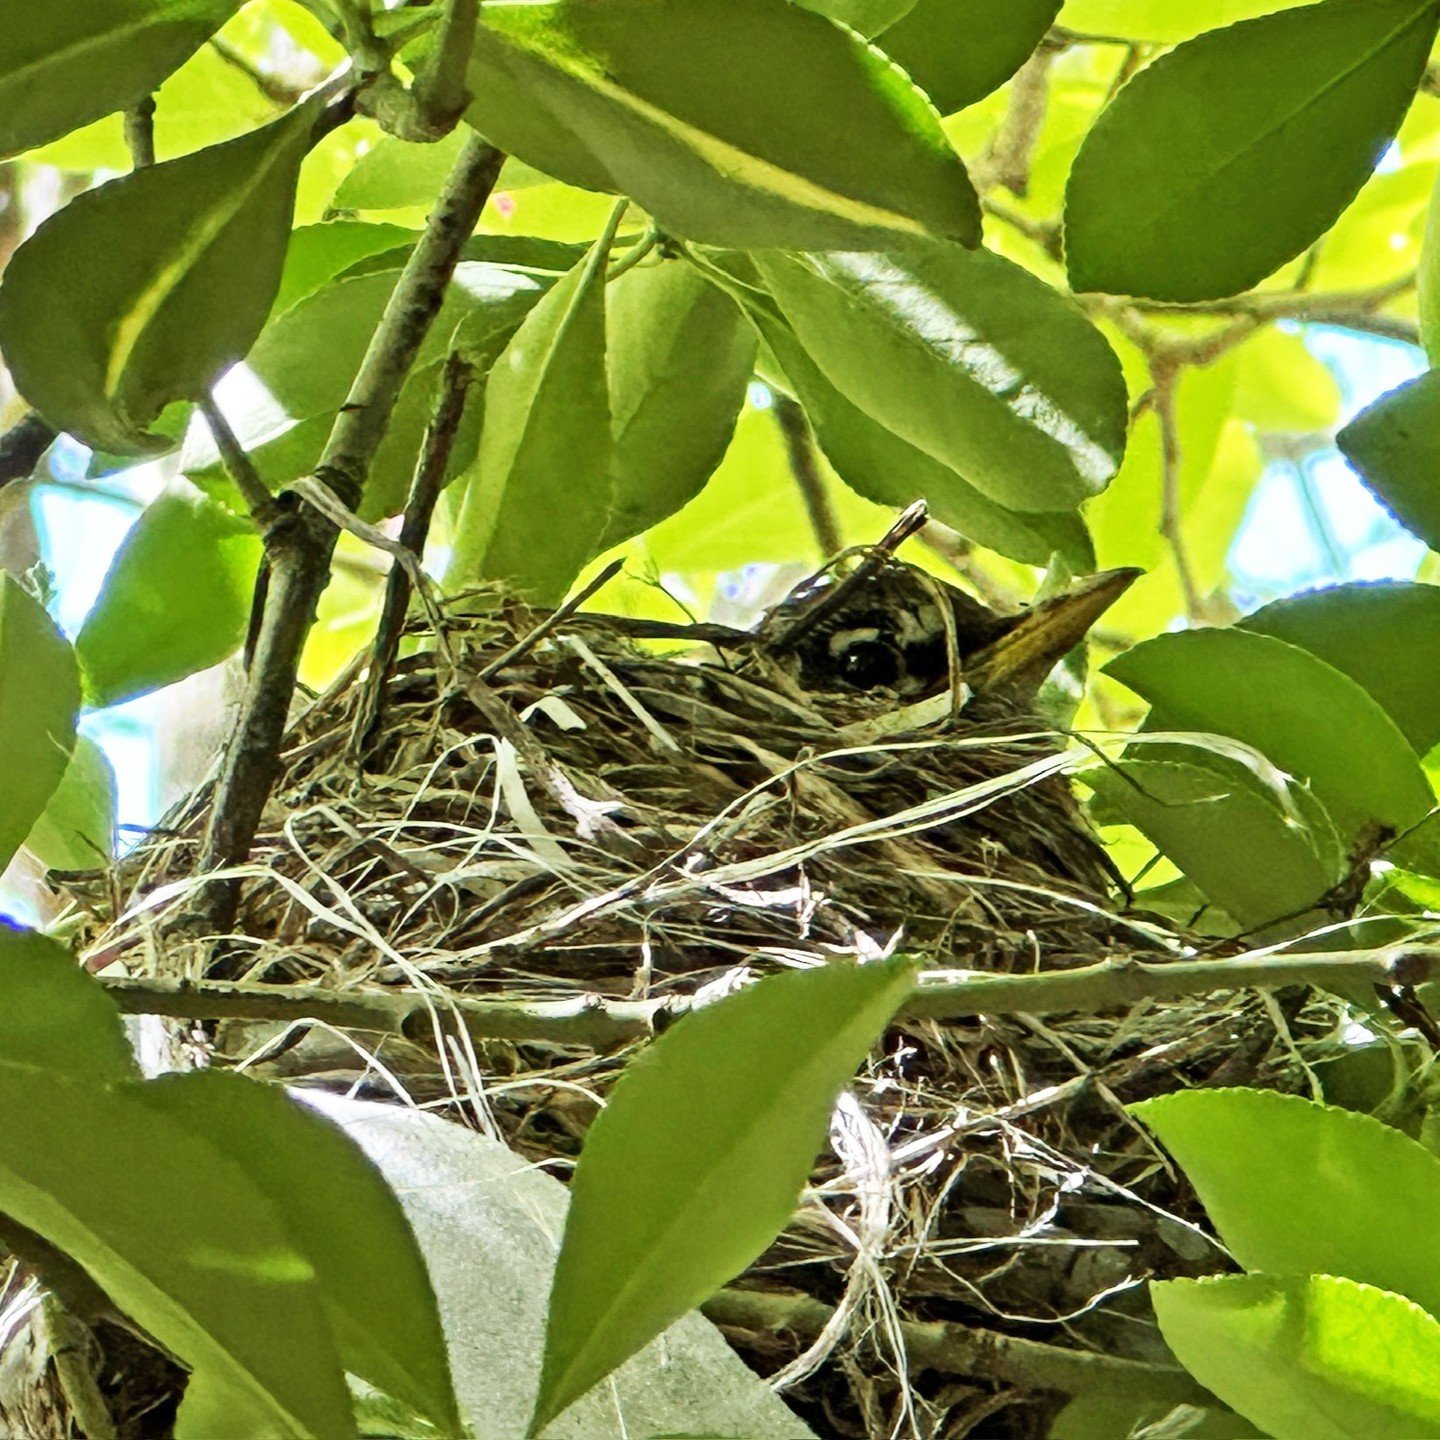 This morning in the St. Vartan Park garden, we checked in on this robin's nest. For the second straight spring, we've been teaching garden visitors from a respectful distance about the stages from robin's nest creation through the full fledgling stag